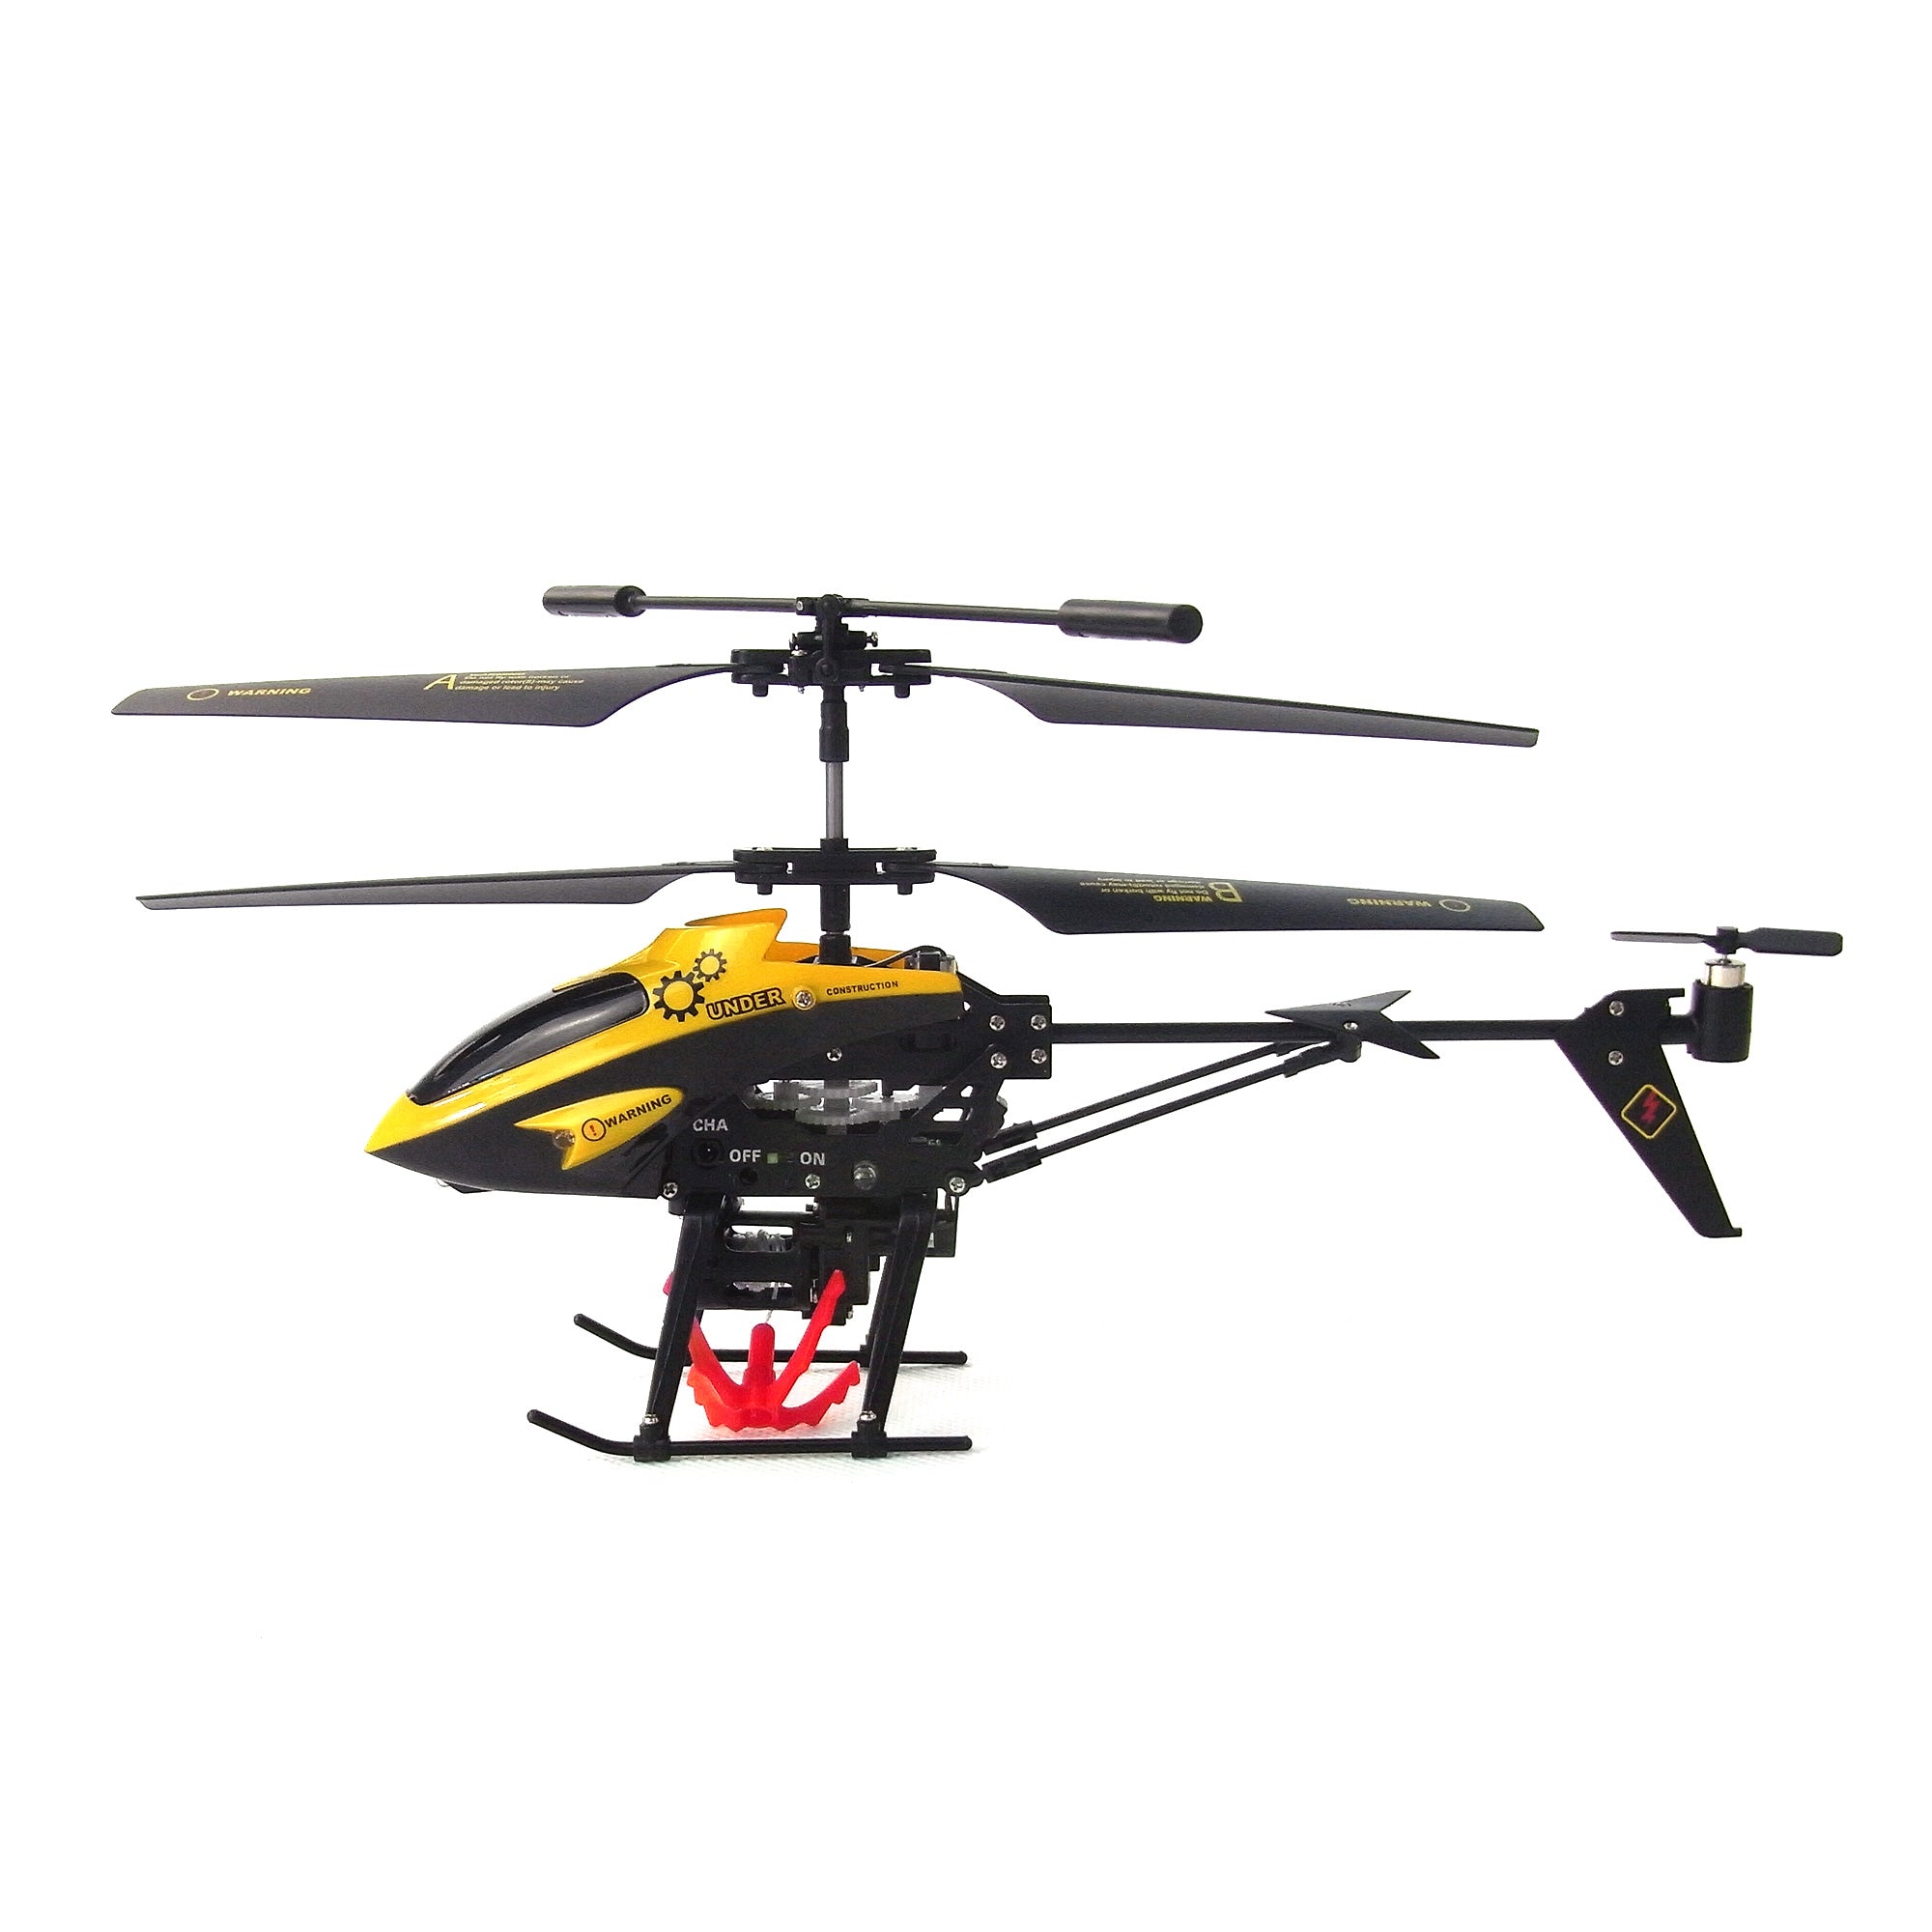 rc helicopter 3.5 ch